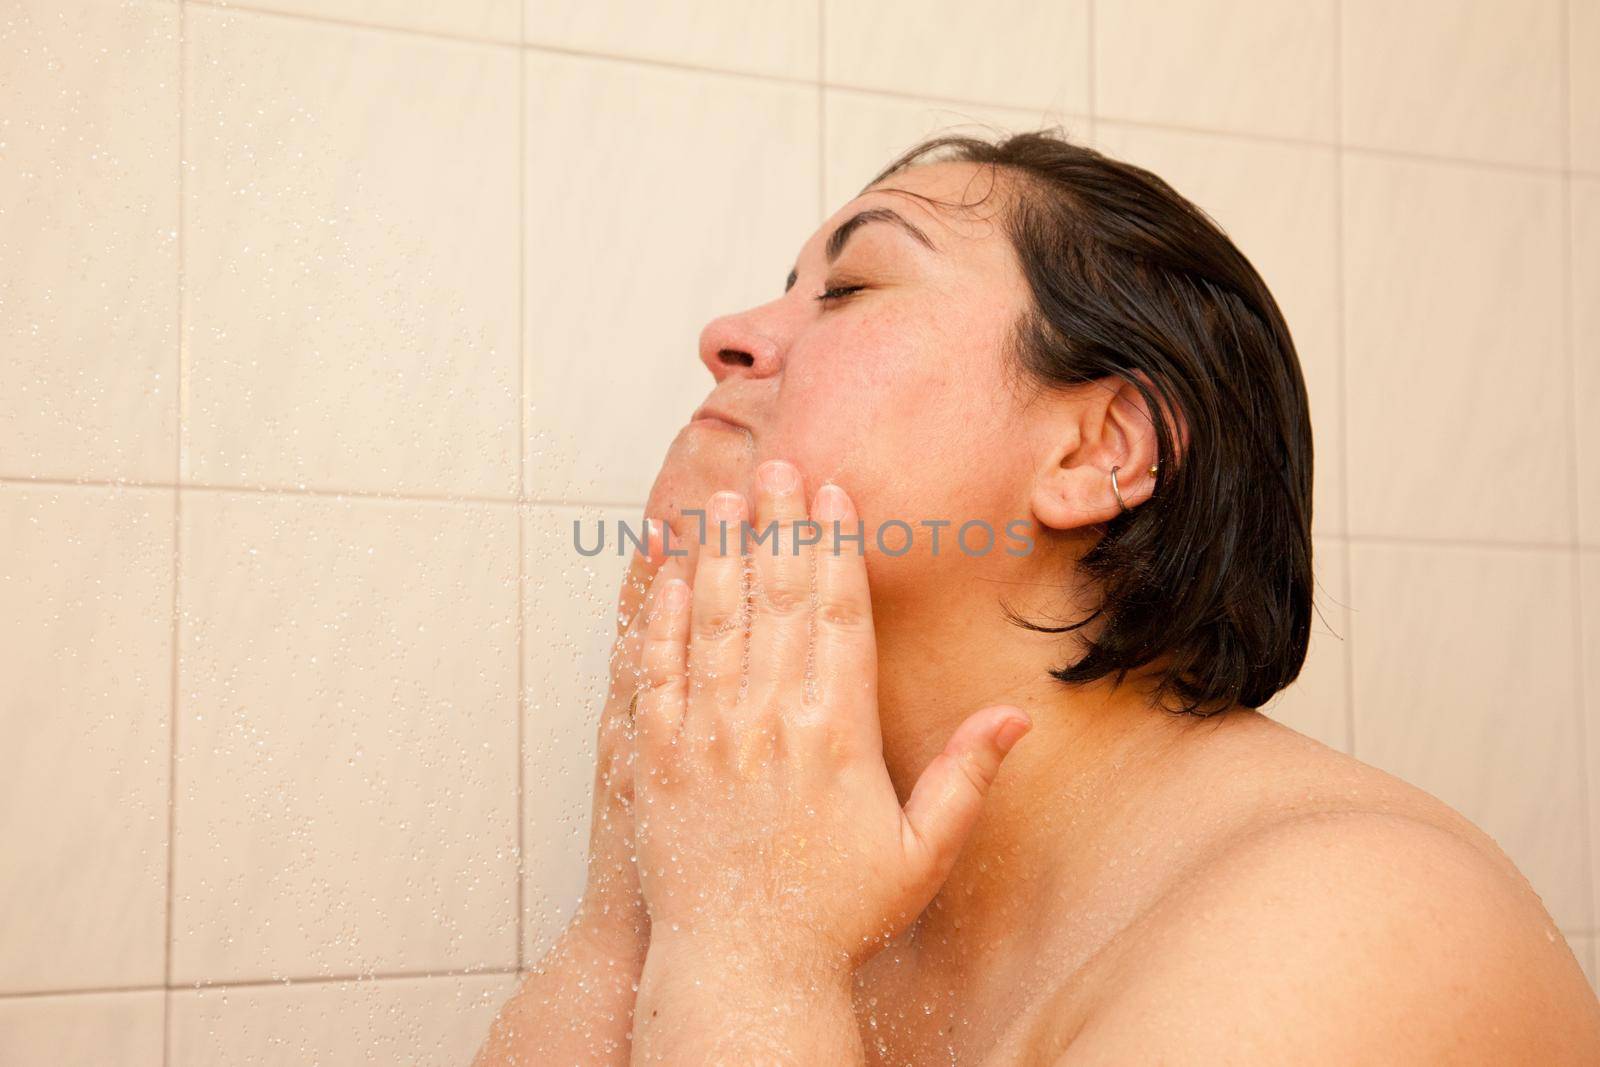 Splashing water and scrubbing her face in the shower 